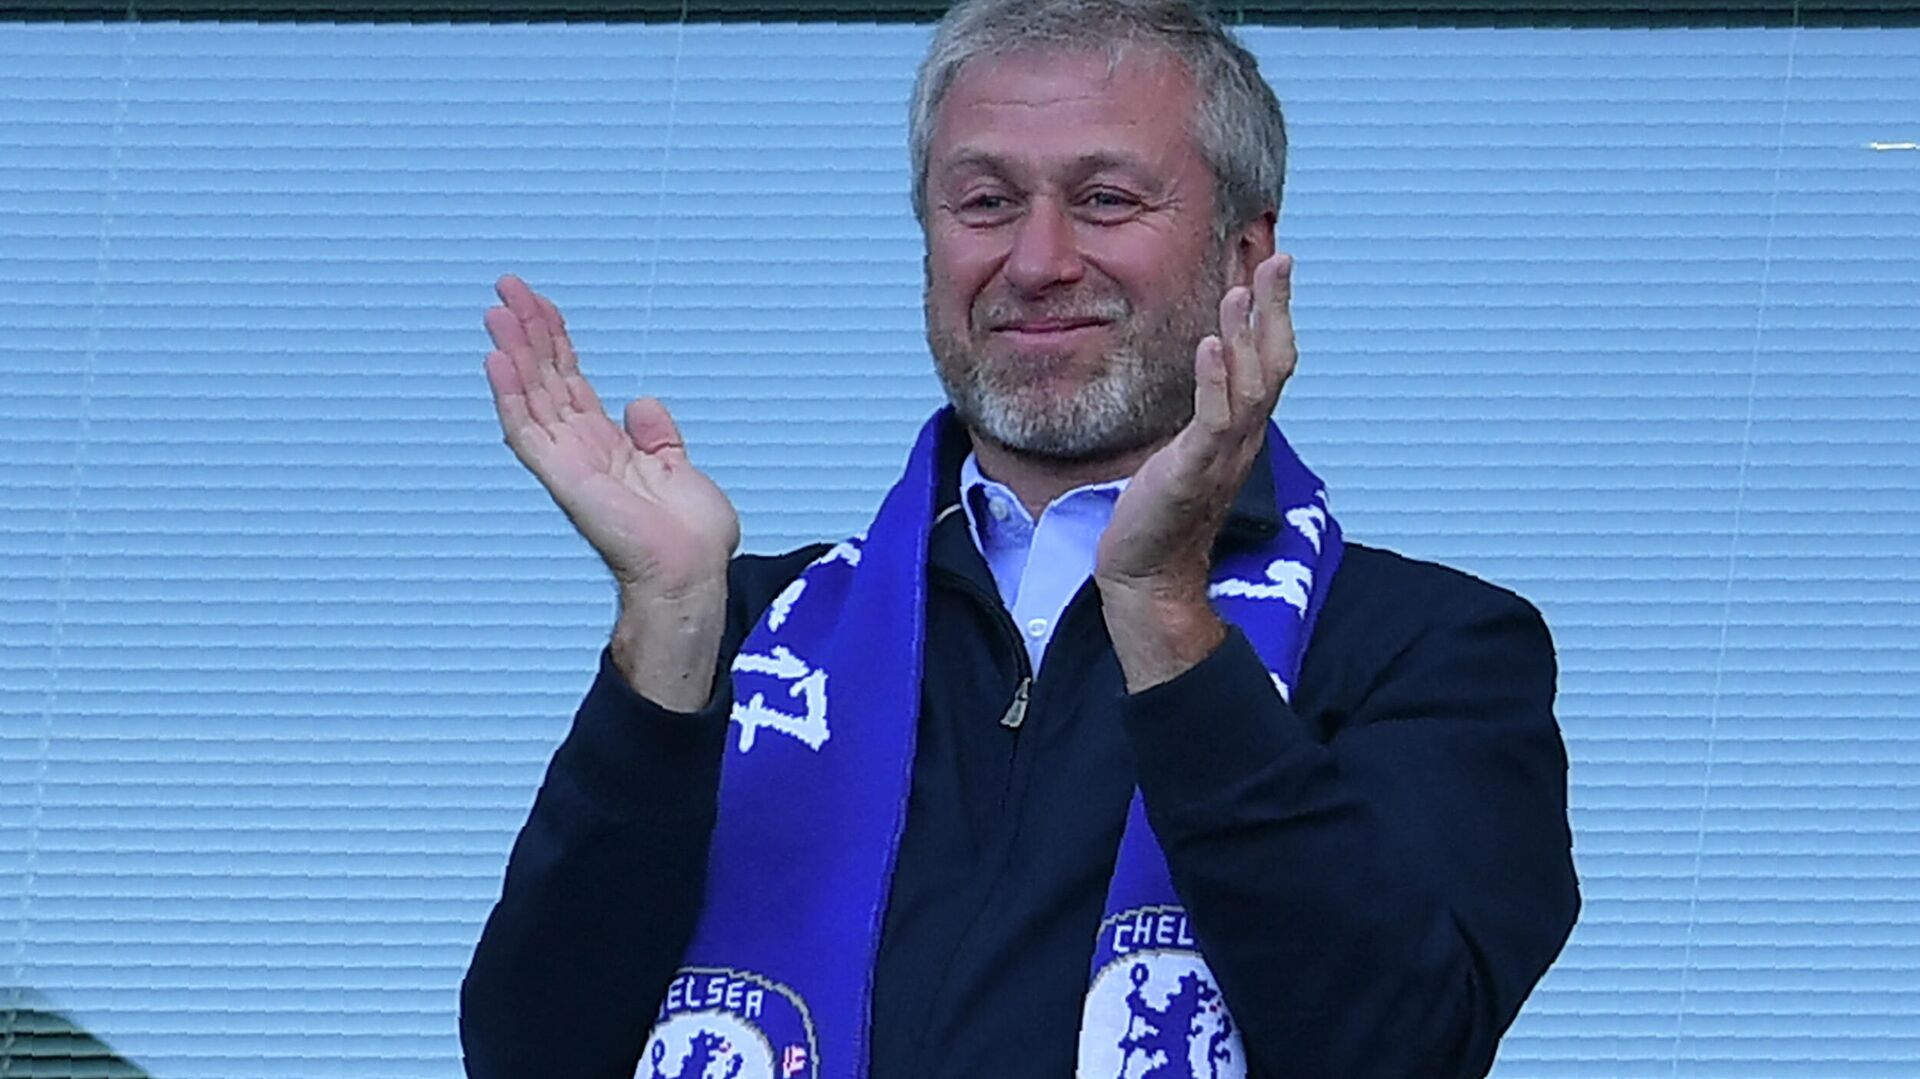 Chelsea's Russian owner Roman Abramovich applauds, as players celebrate their league title win at the end of the Premier League football match between Chelsea and Sunderland at Stamford Bridge in London. - Sputnik International, 1920, 02.03.2022